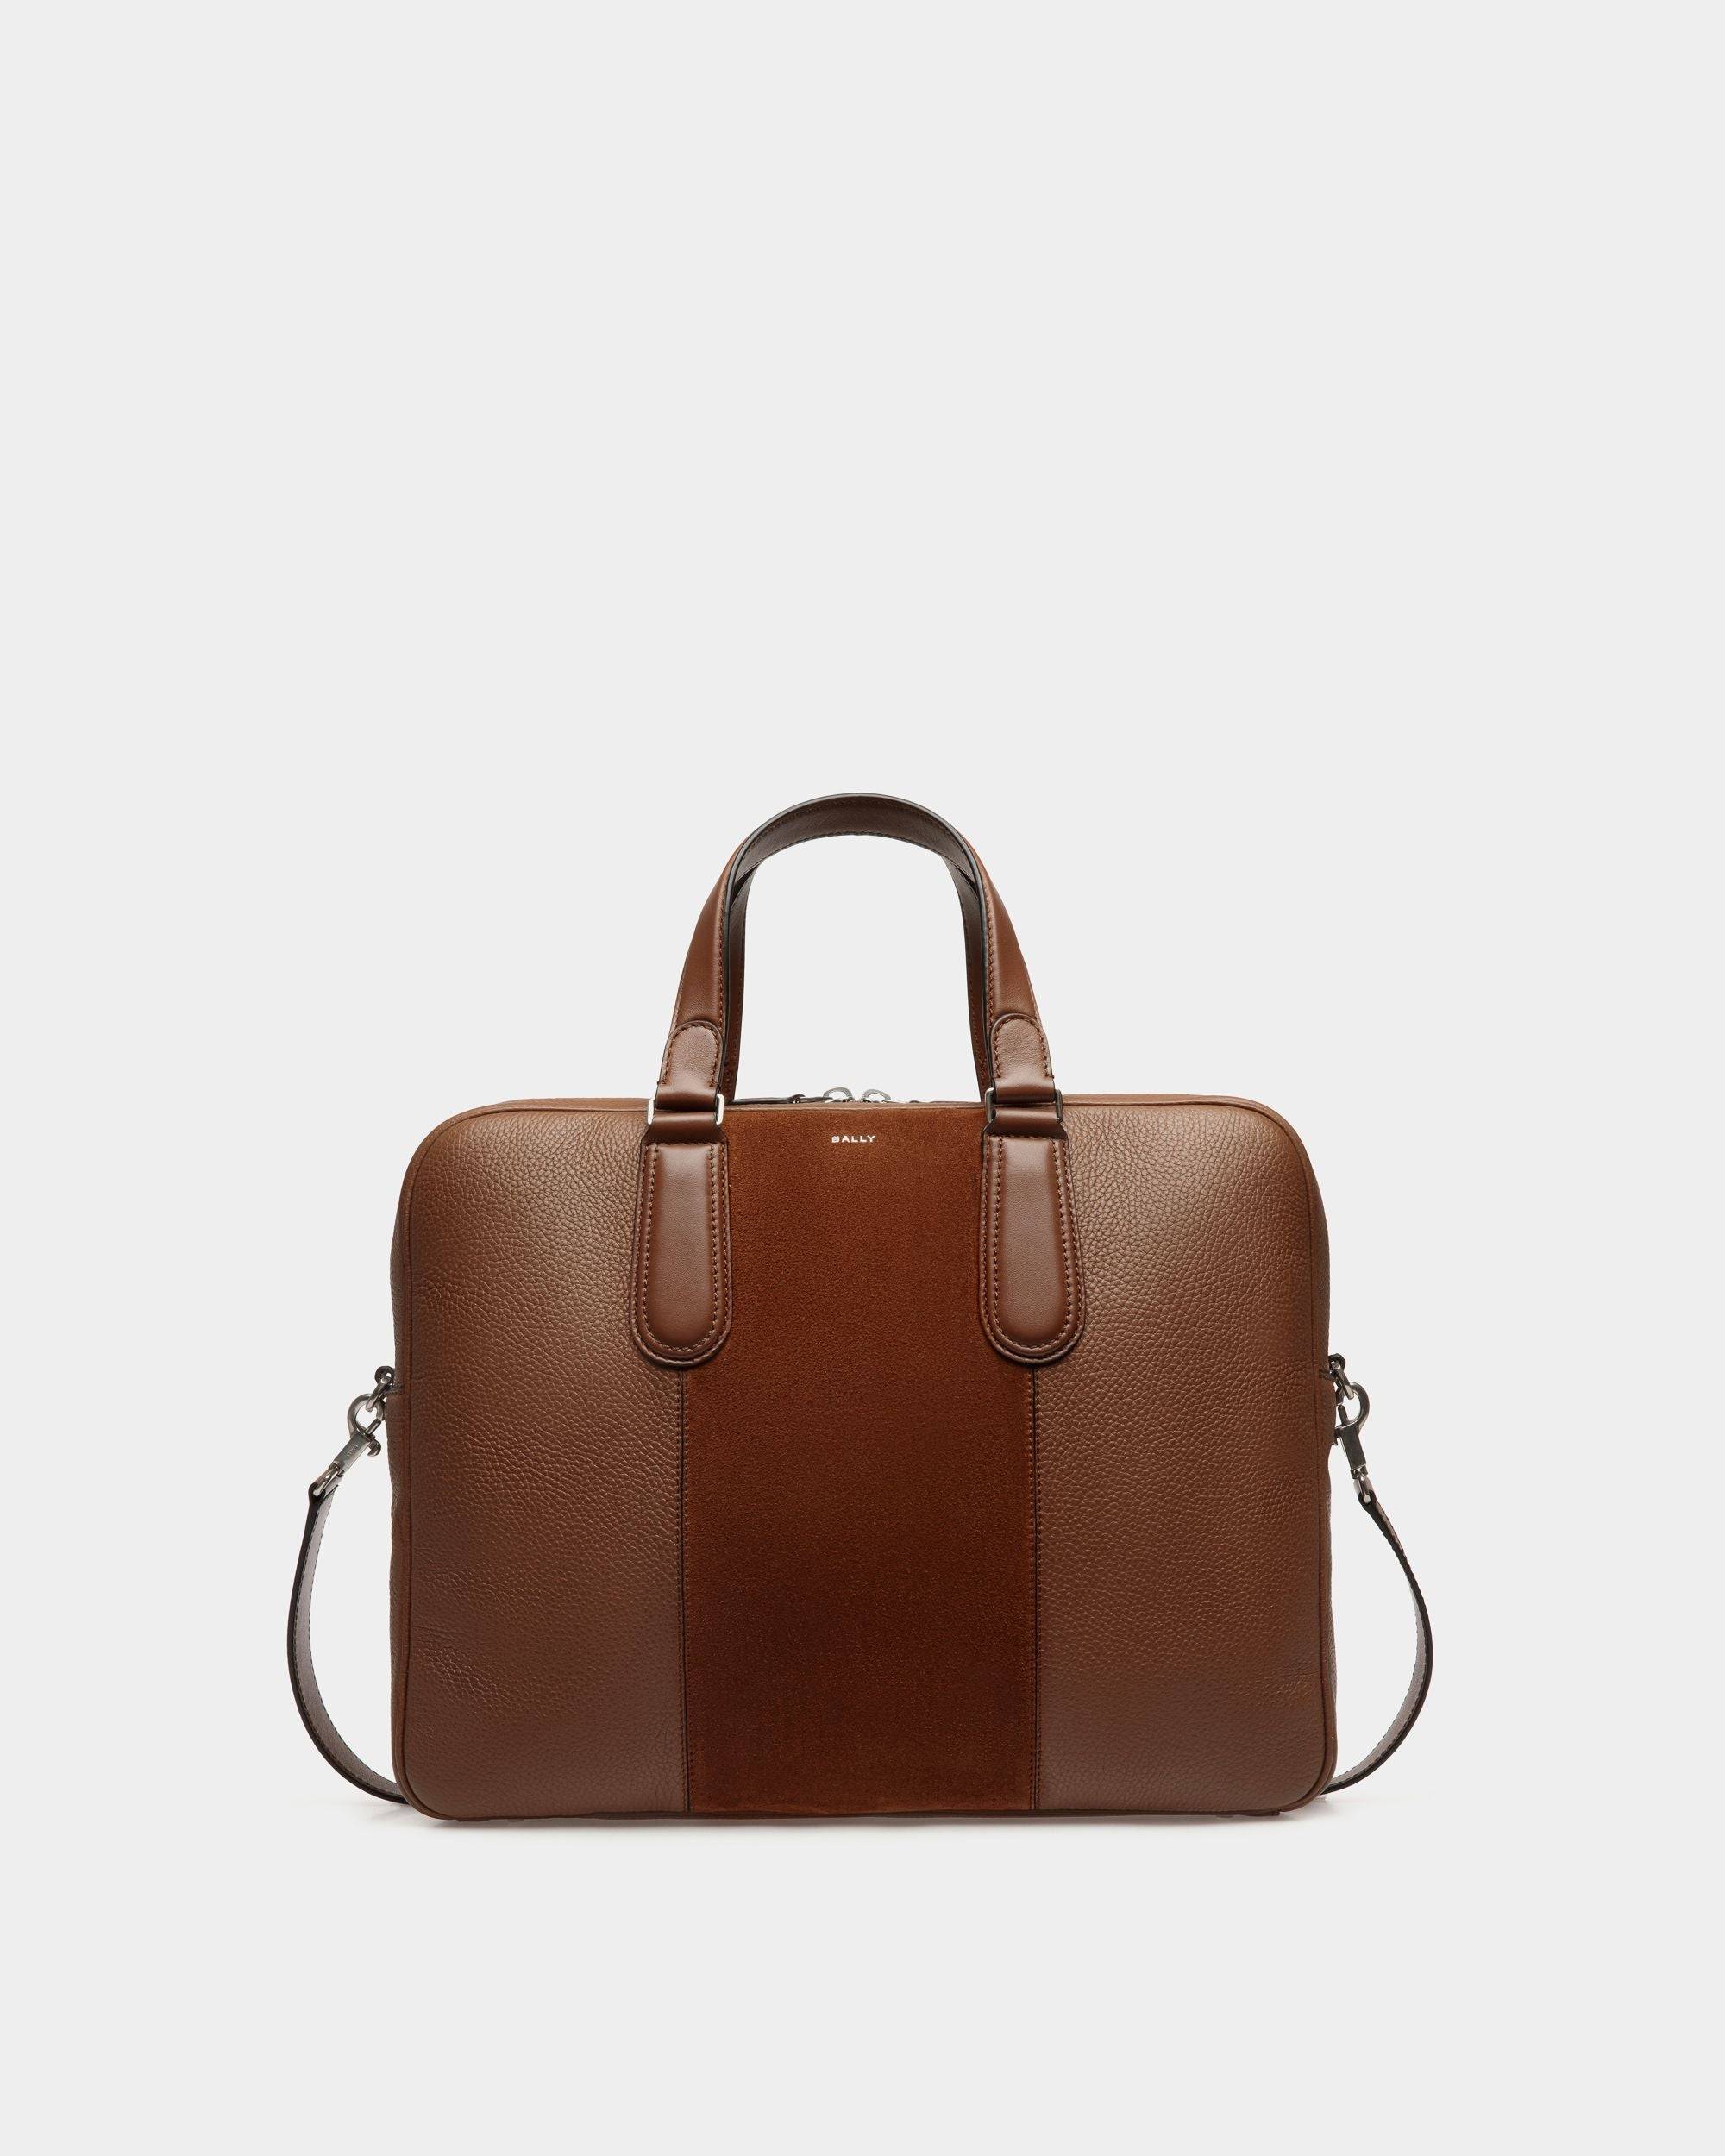 Spin | Men's Briefcase in Brown Leather | Bally | Still Life Front